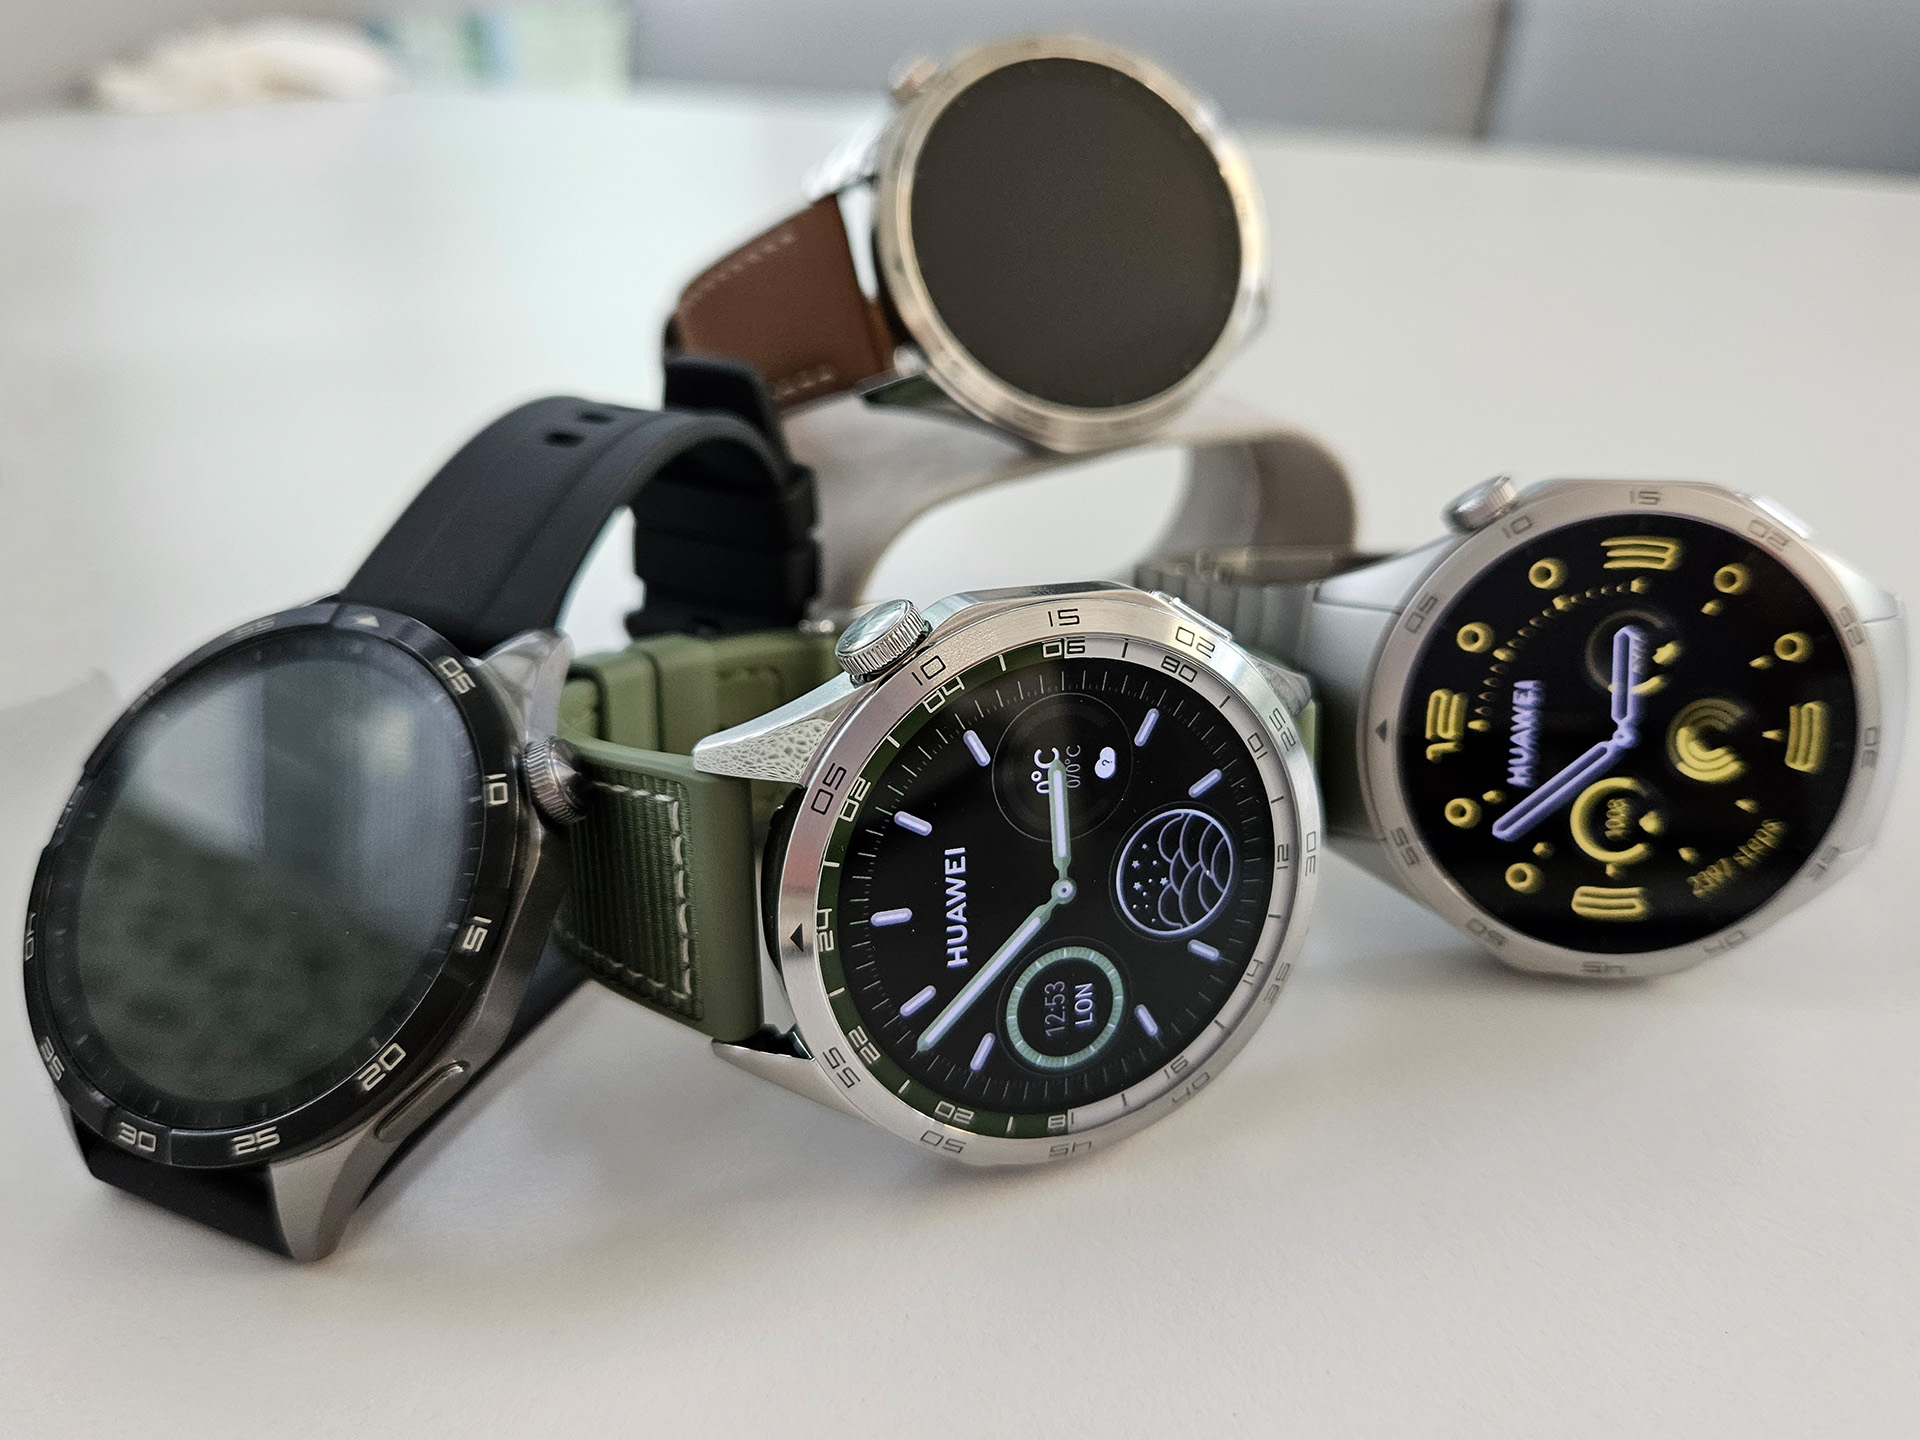 Huawei Watch GT 4 review: Classy and affordable fitness watch